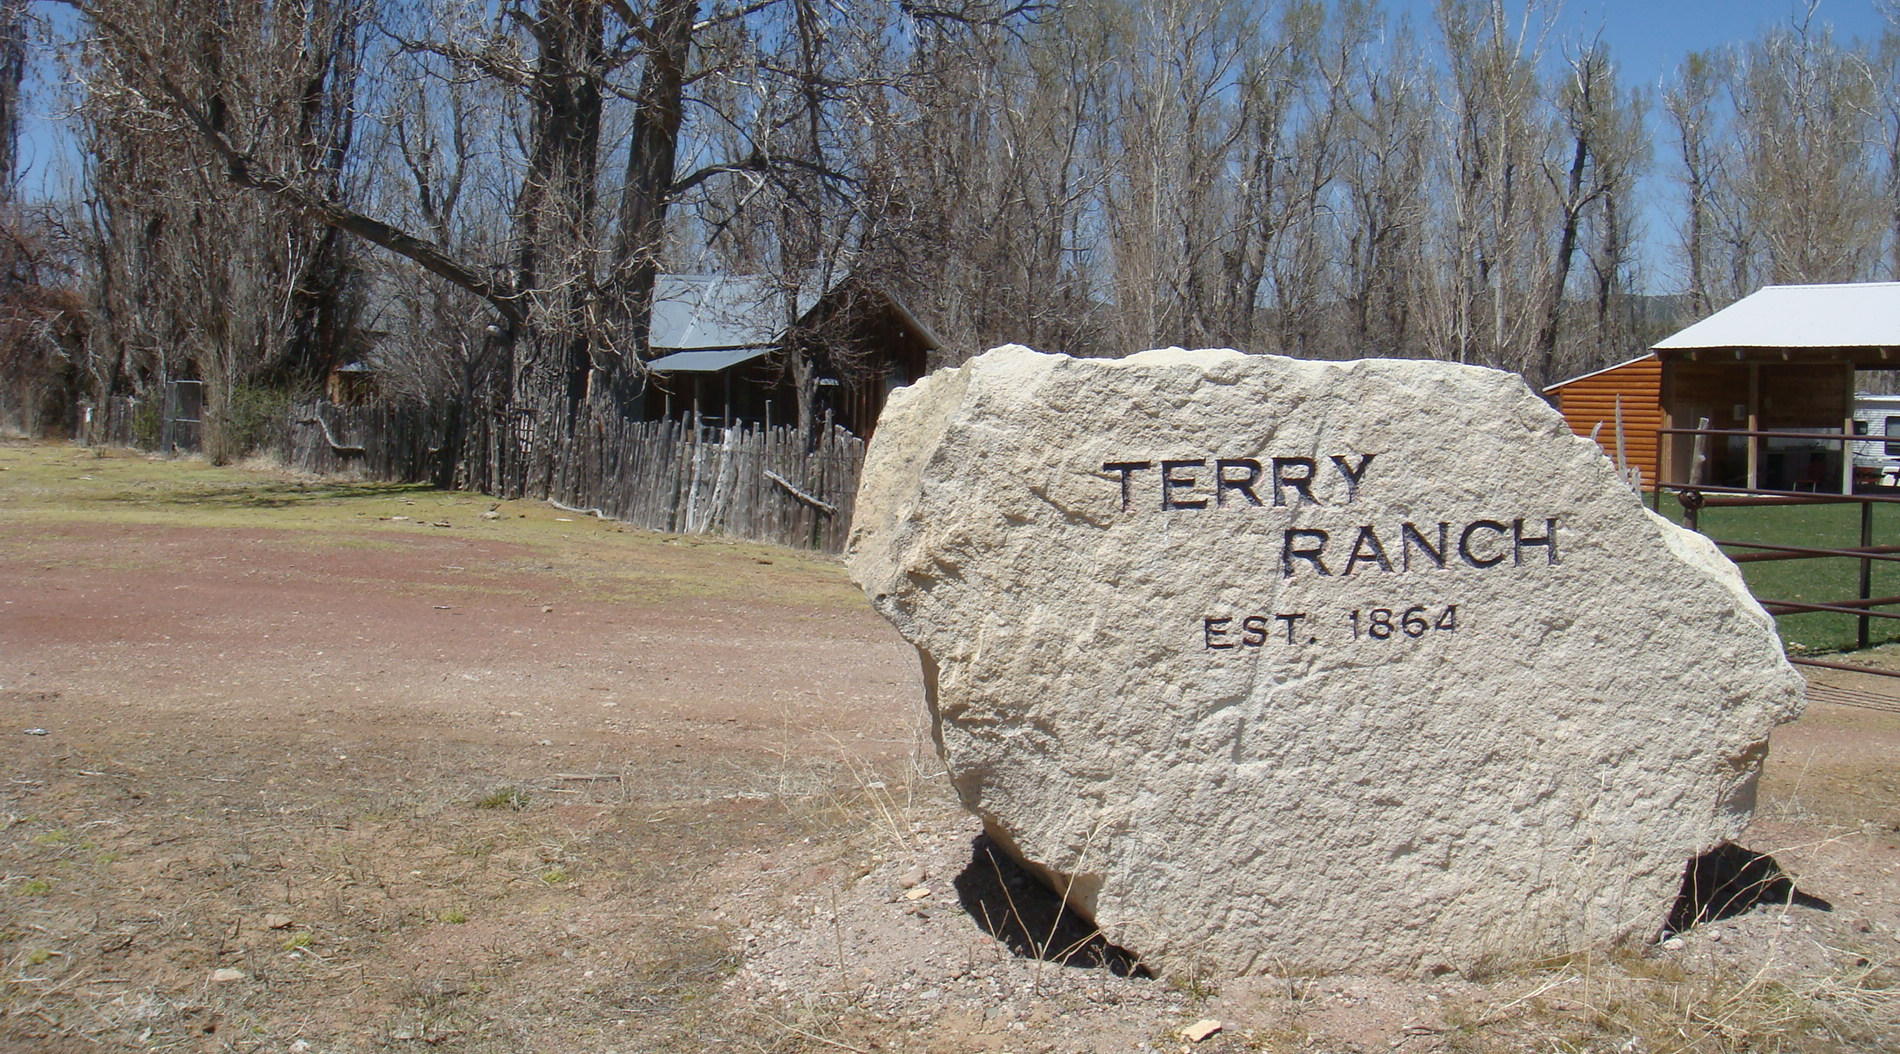 Terry Ranch sign painted on a big rock